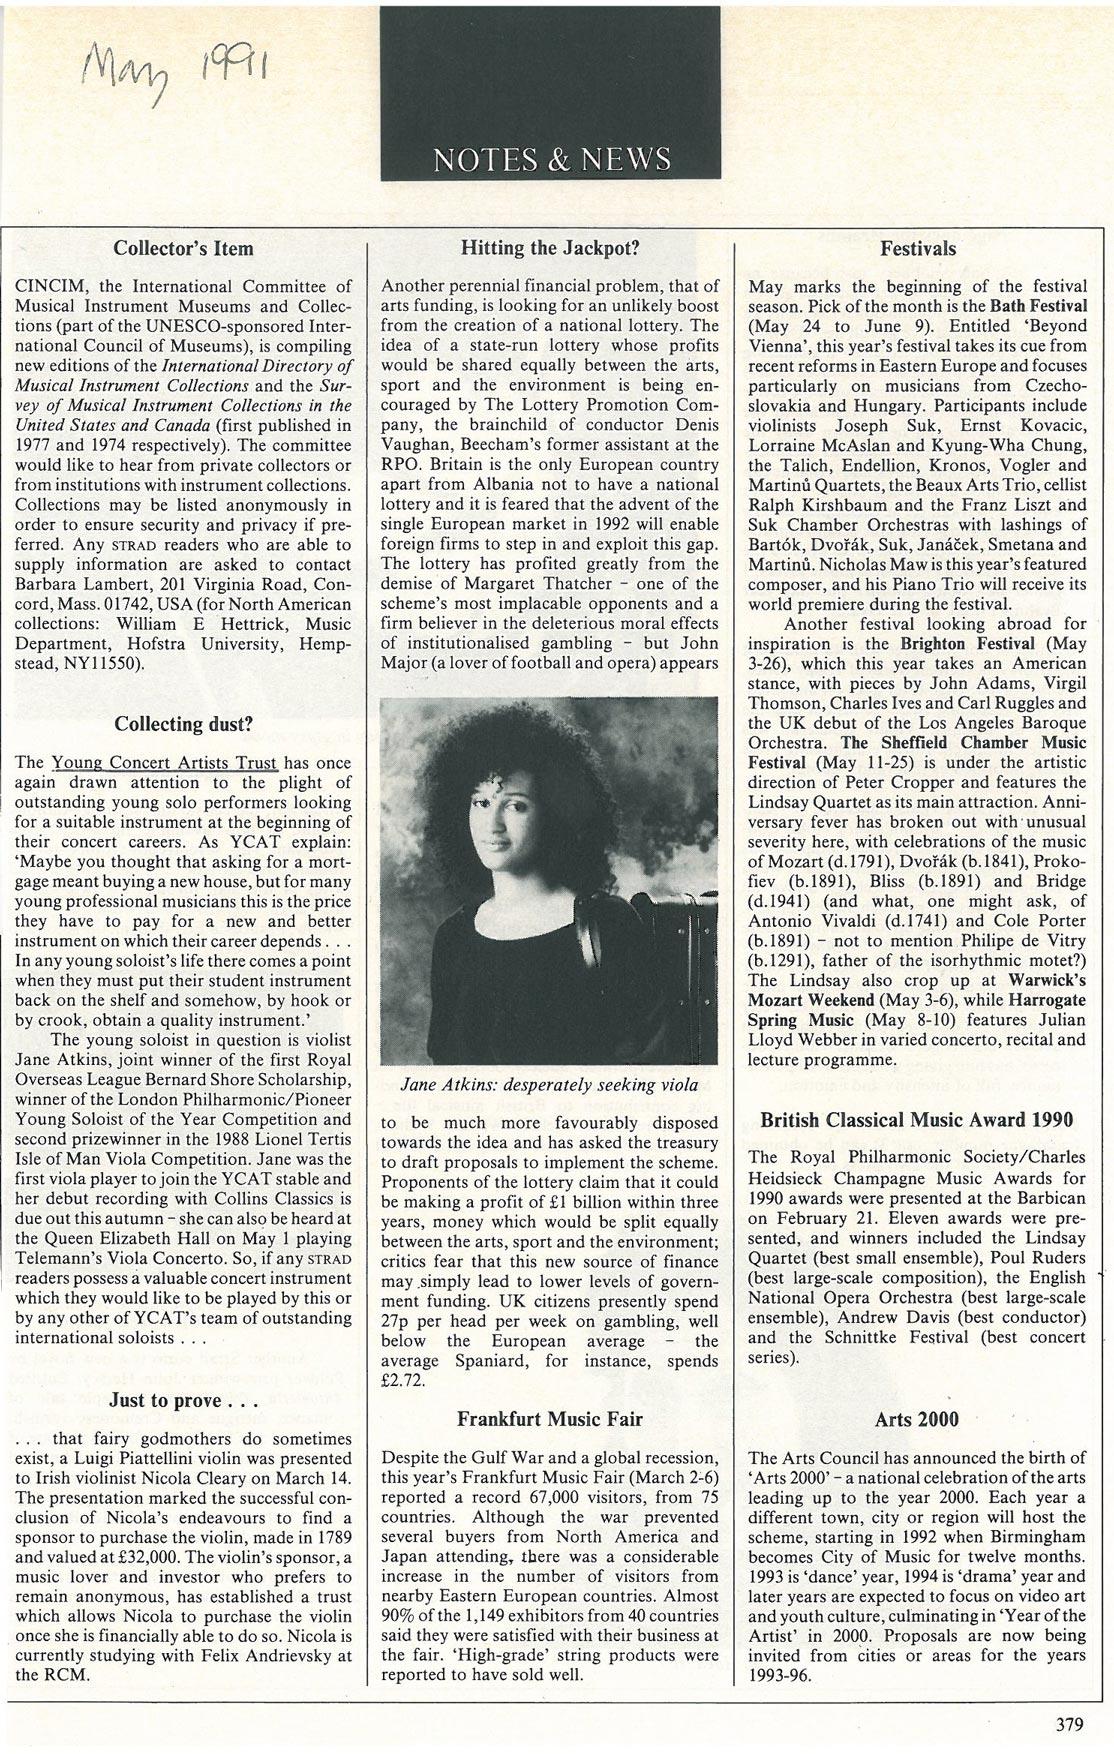 Notes and News, 1991